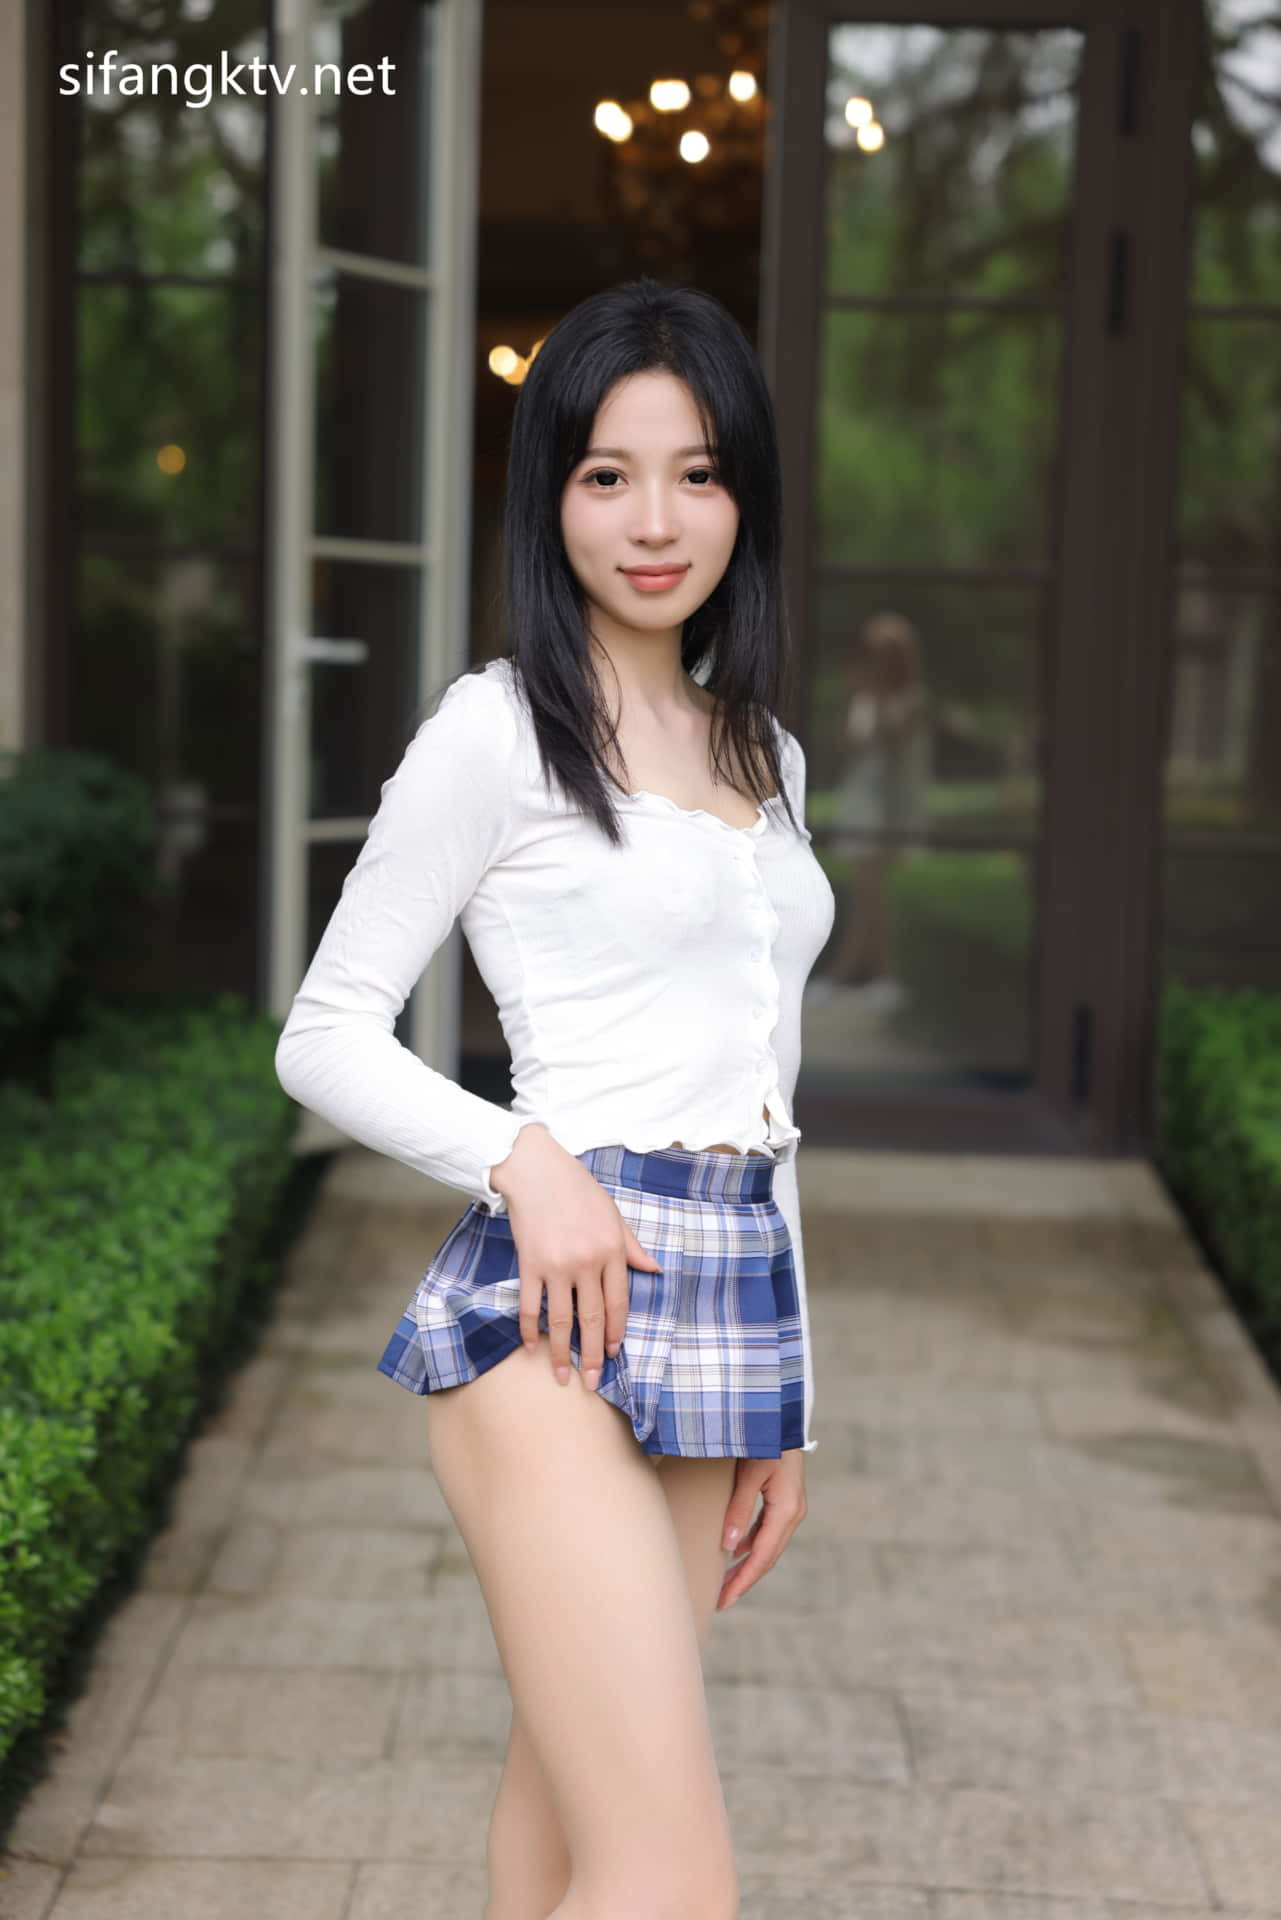 Hidetoshi Goddess Tang Bean Temptation Private Photography ~ Three Points Revealed + Cute Transparent Small Underwear in Student Uniforms and Self-Touching with Props